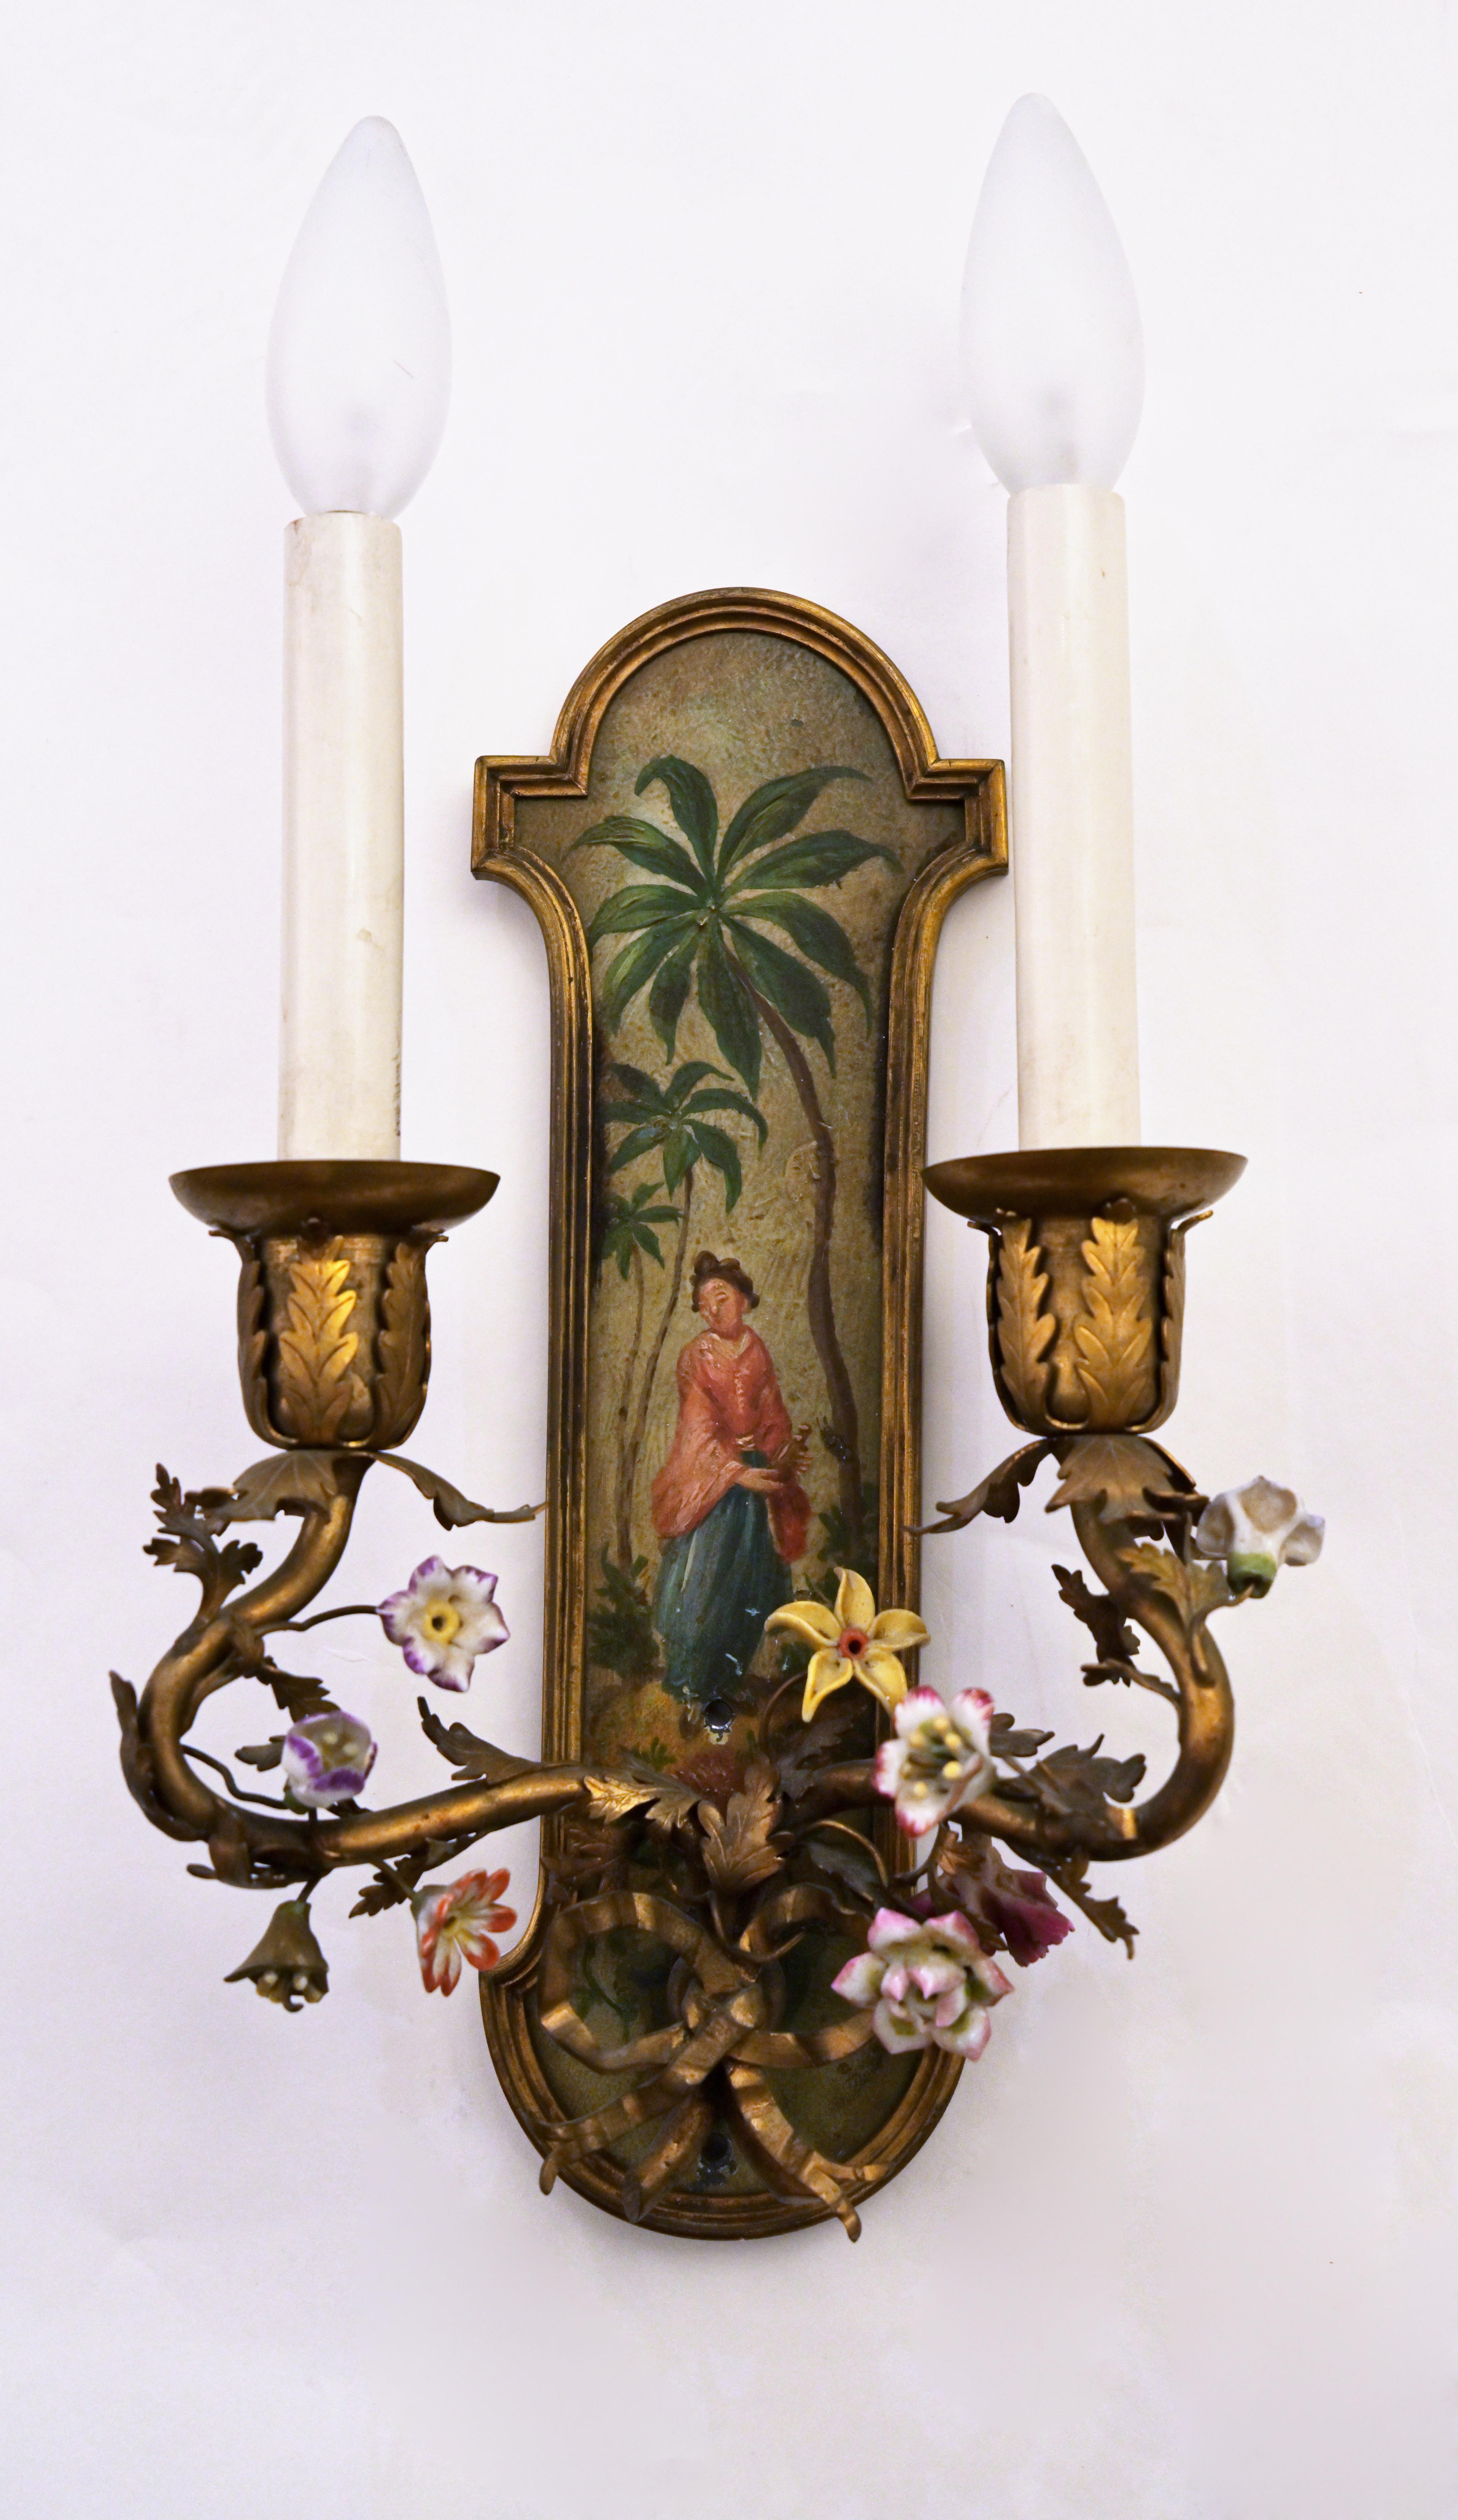 Pair of French Louis XVth style sconces, the shaped metal backplate with bronze edge having hand painted Chinese inspired figures and landscape. Arms are decorated with porcelain flowers. Circa 1920. Includes UL wiring.